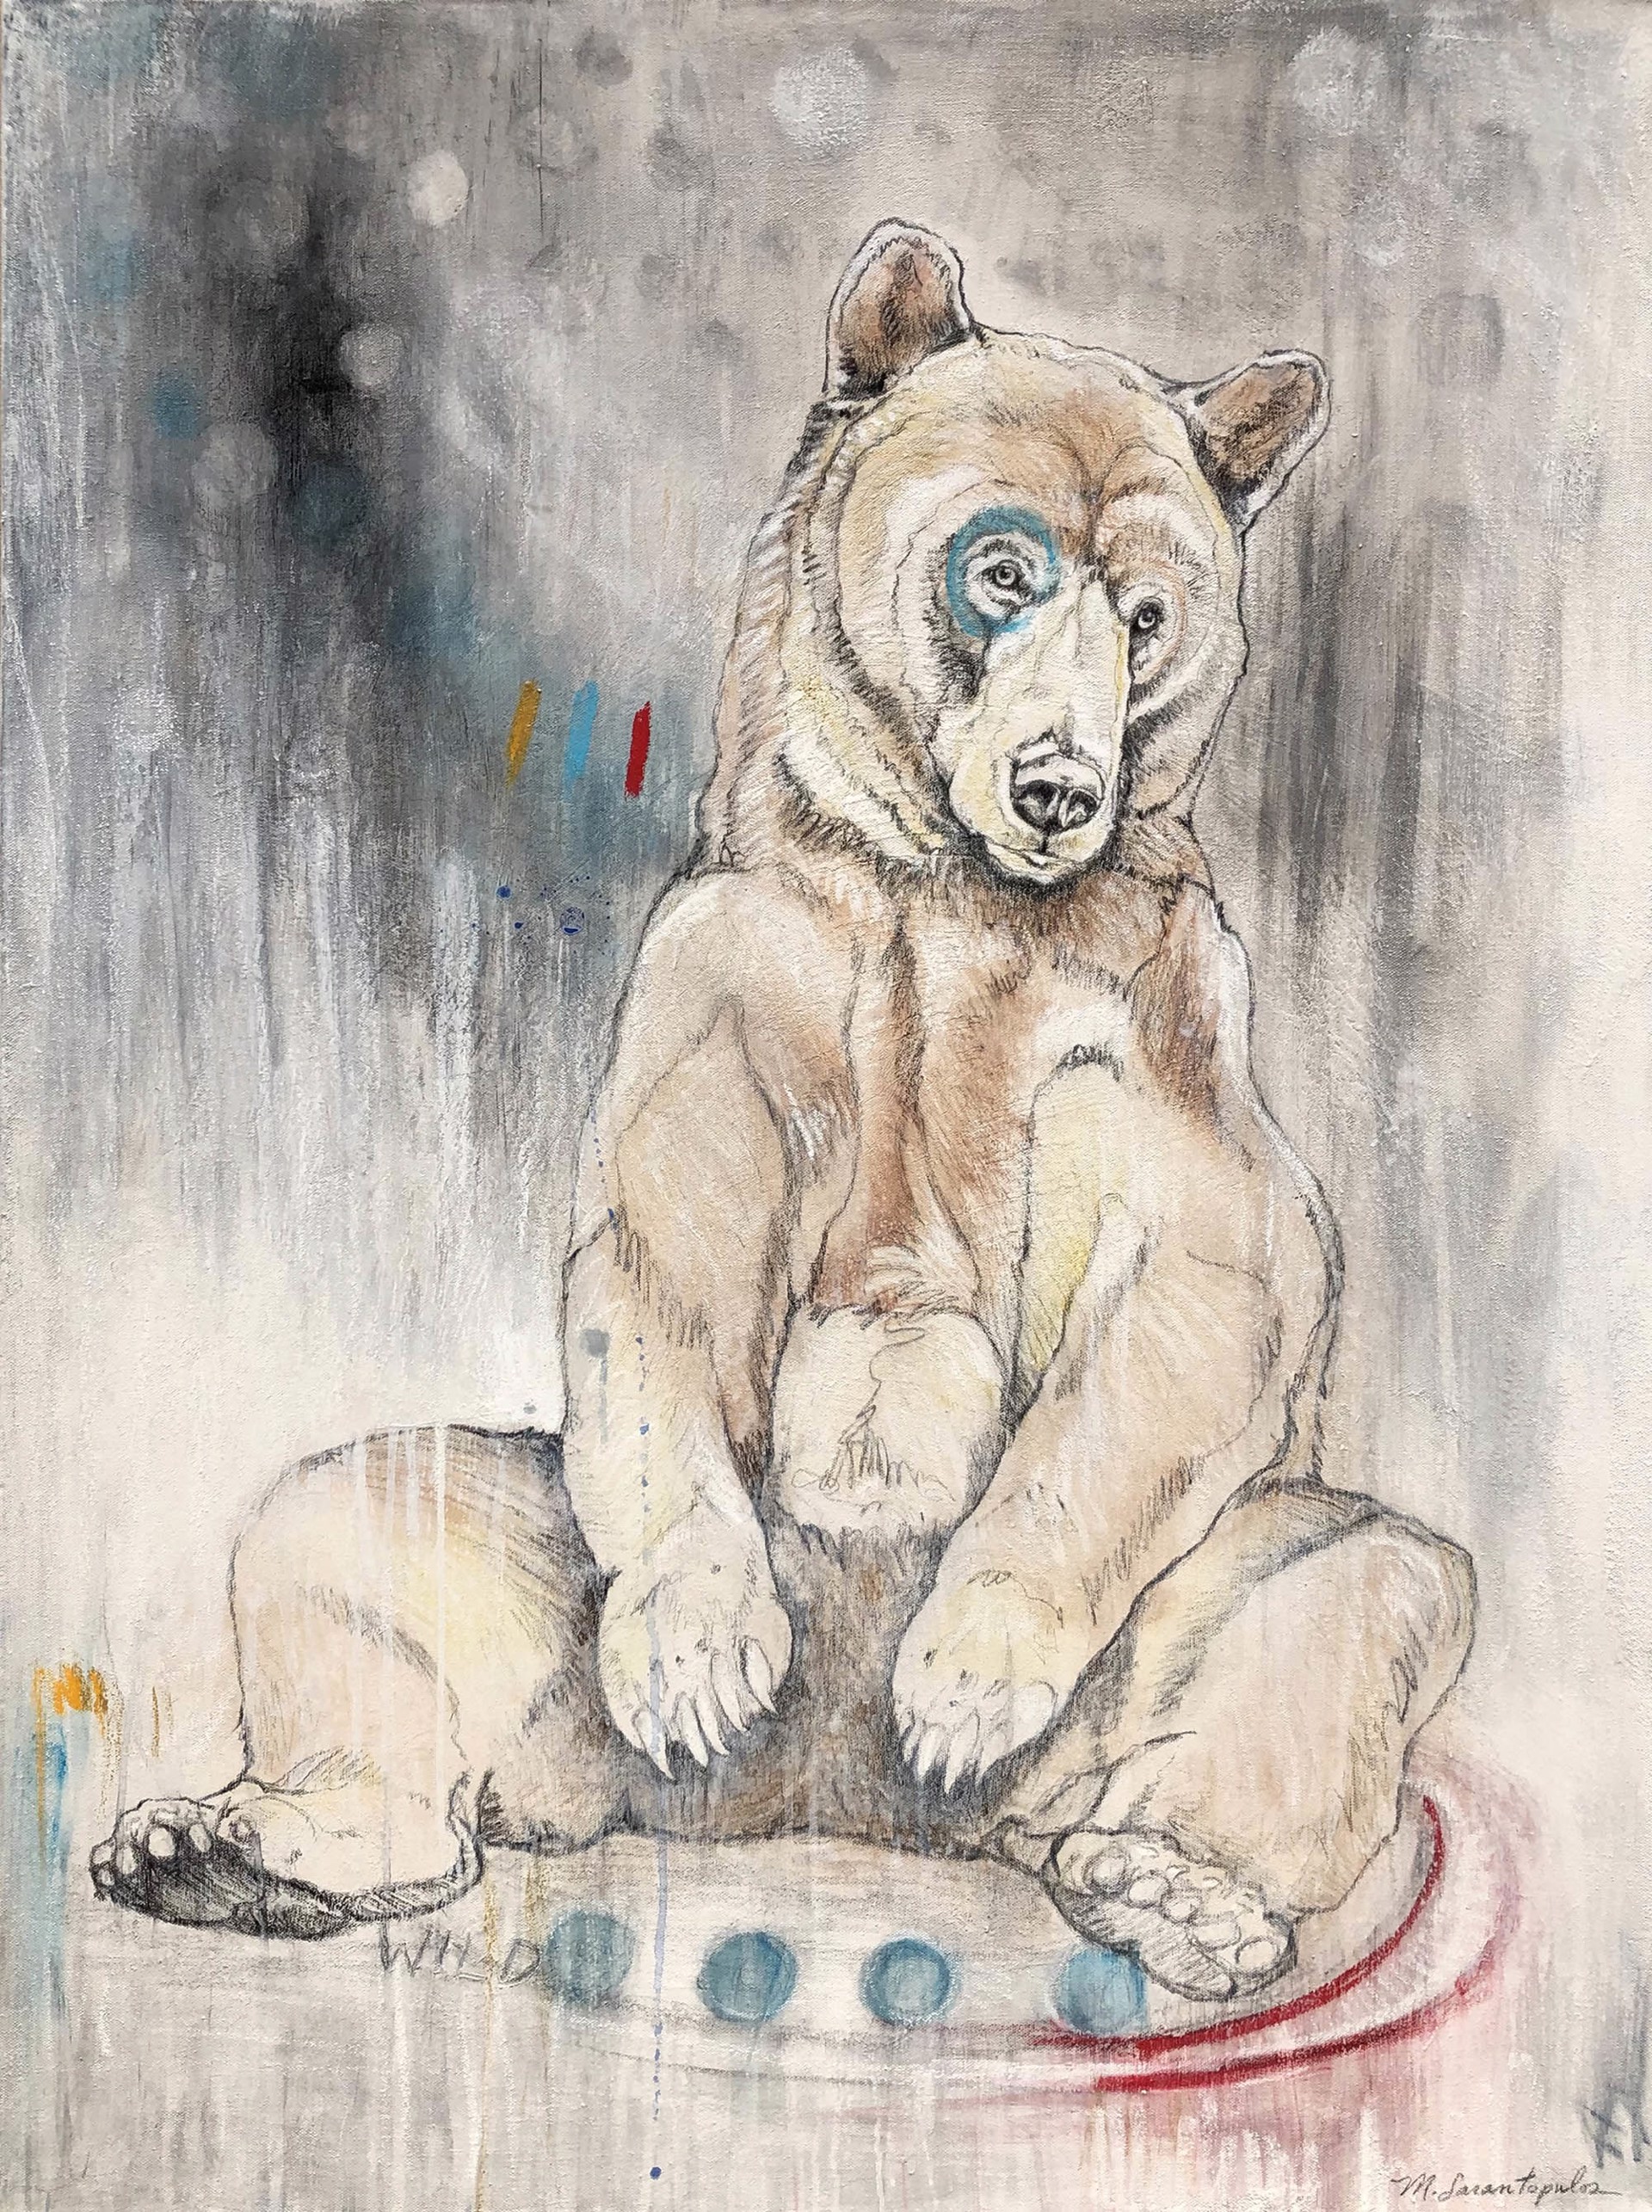 Original Mixed Media Painting Featuring A Sitting Bear Sketched Onto Abstract Gray Background With Doodle Details